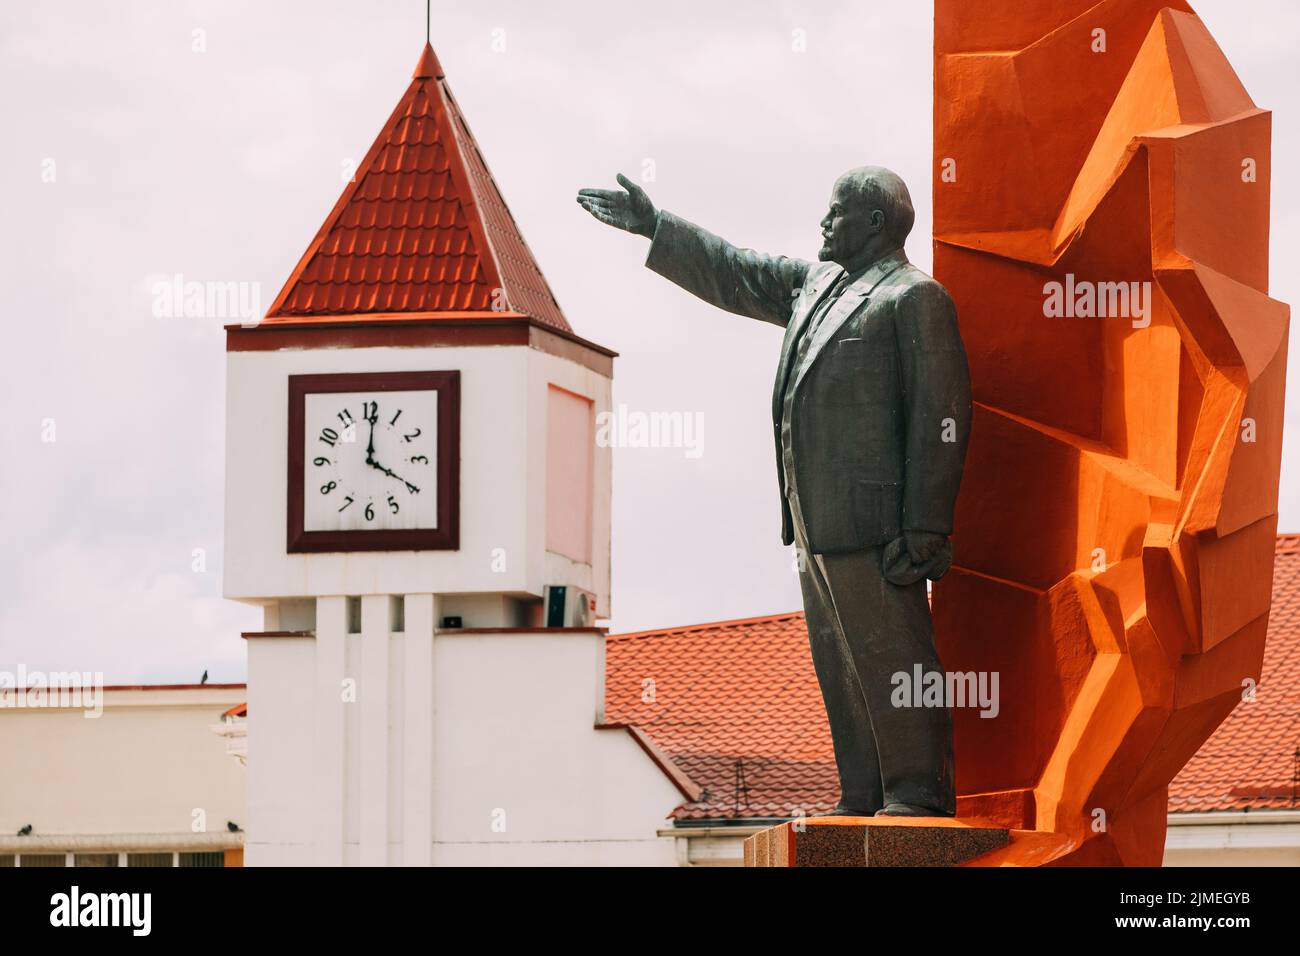 Mozyr, Belarus. Vladimir Lenin Stone Monument Infront Of City Palace Of Culture With Tower Clock. Founder Of Communism. Vladimir Lenin Was A Russian R Stock Photo